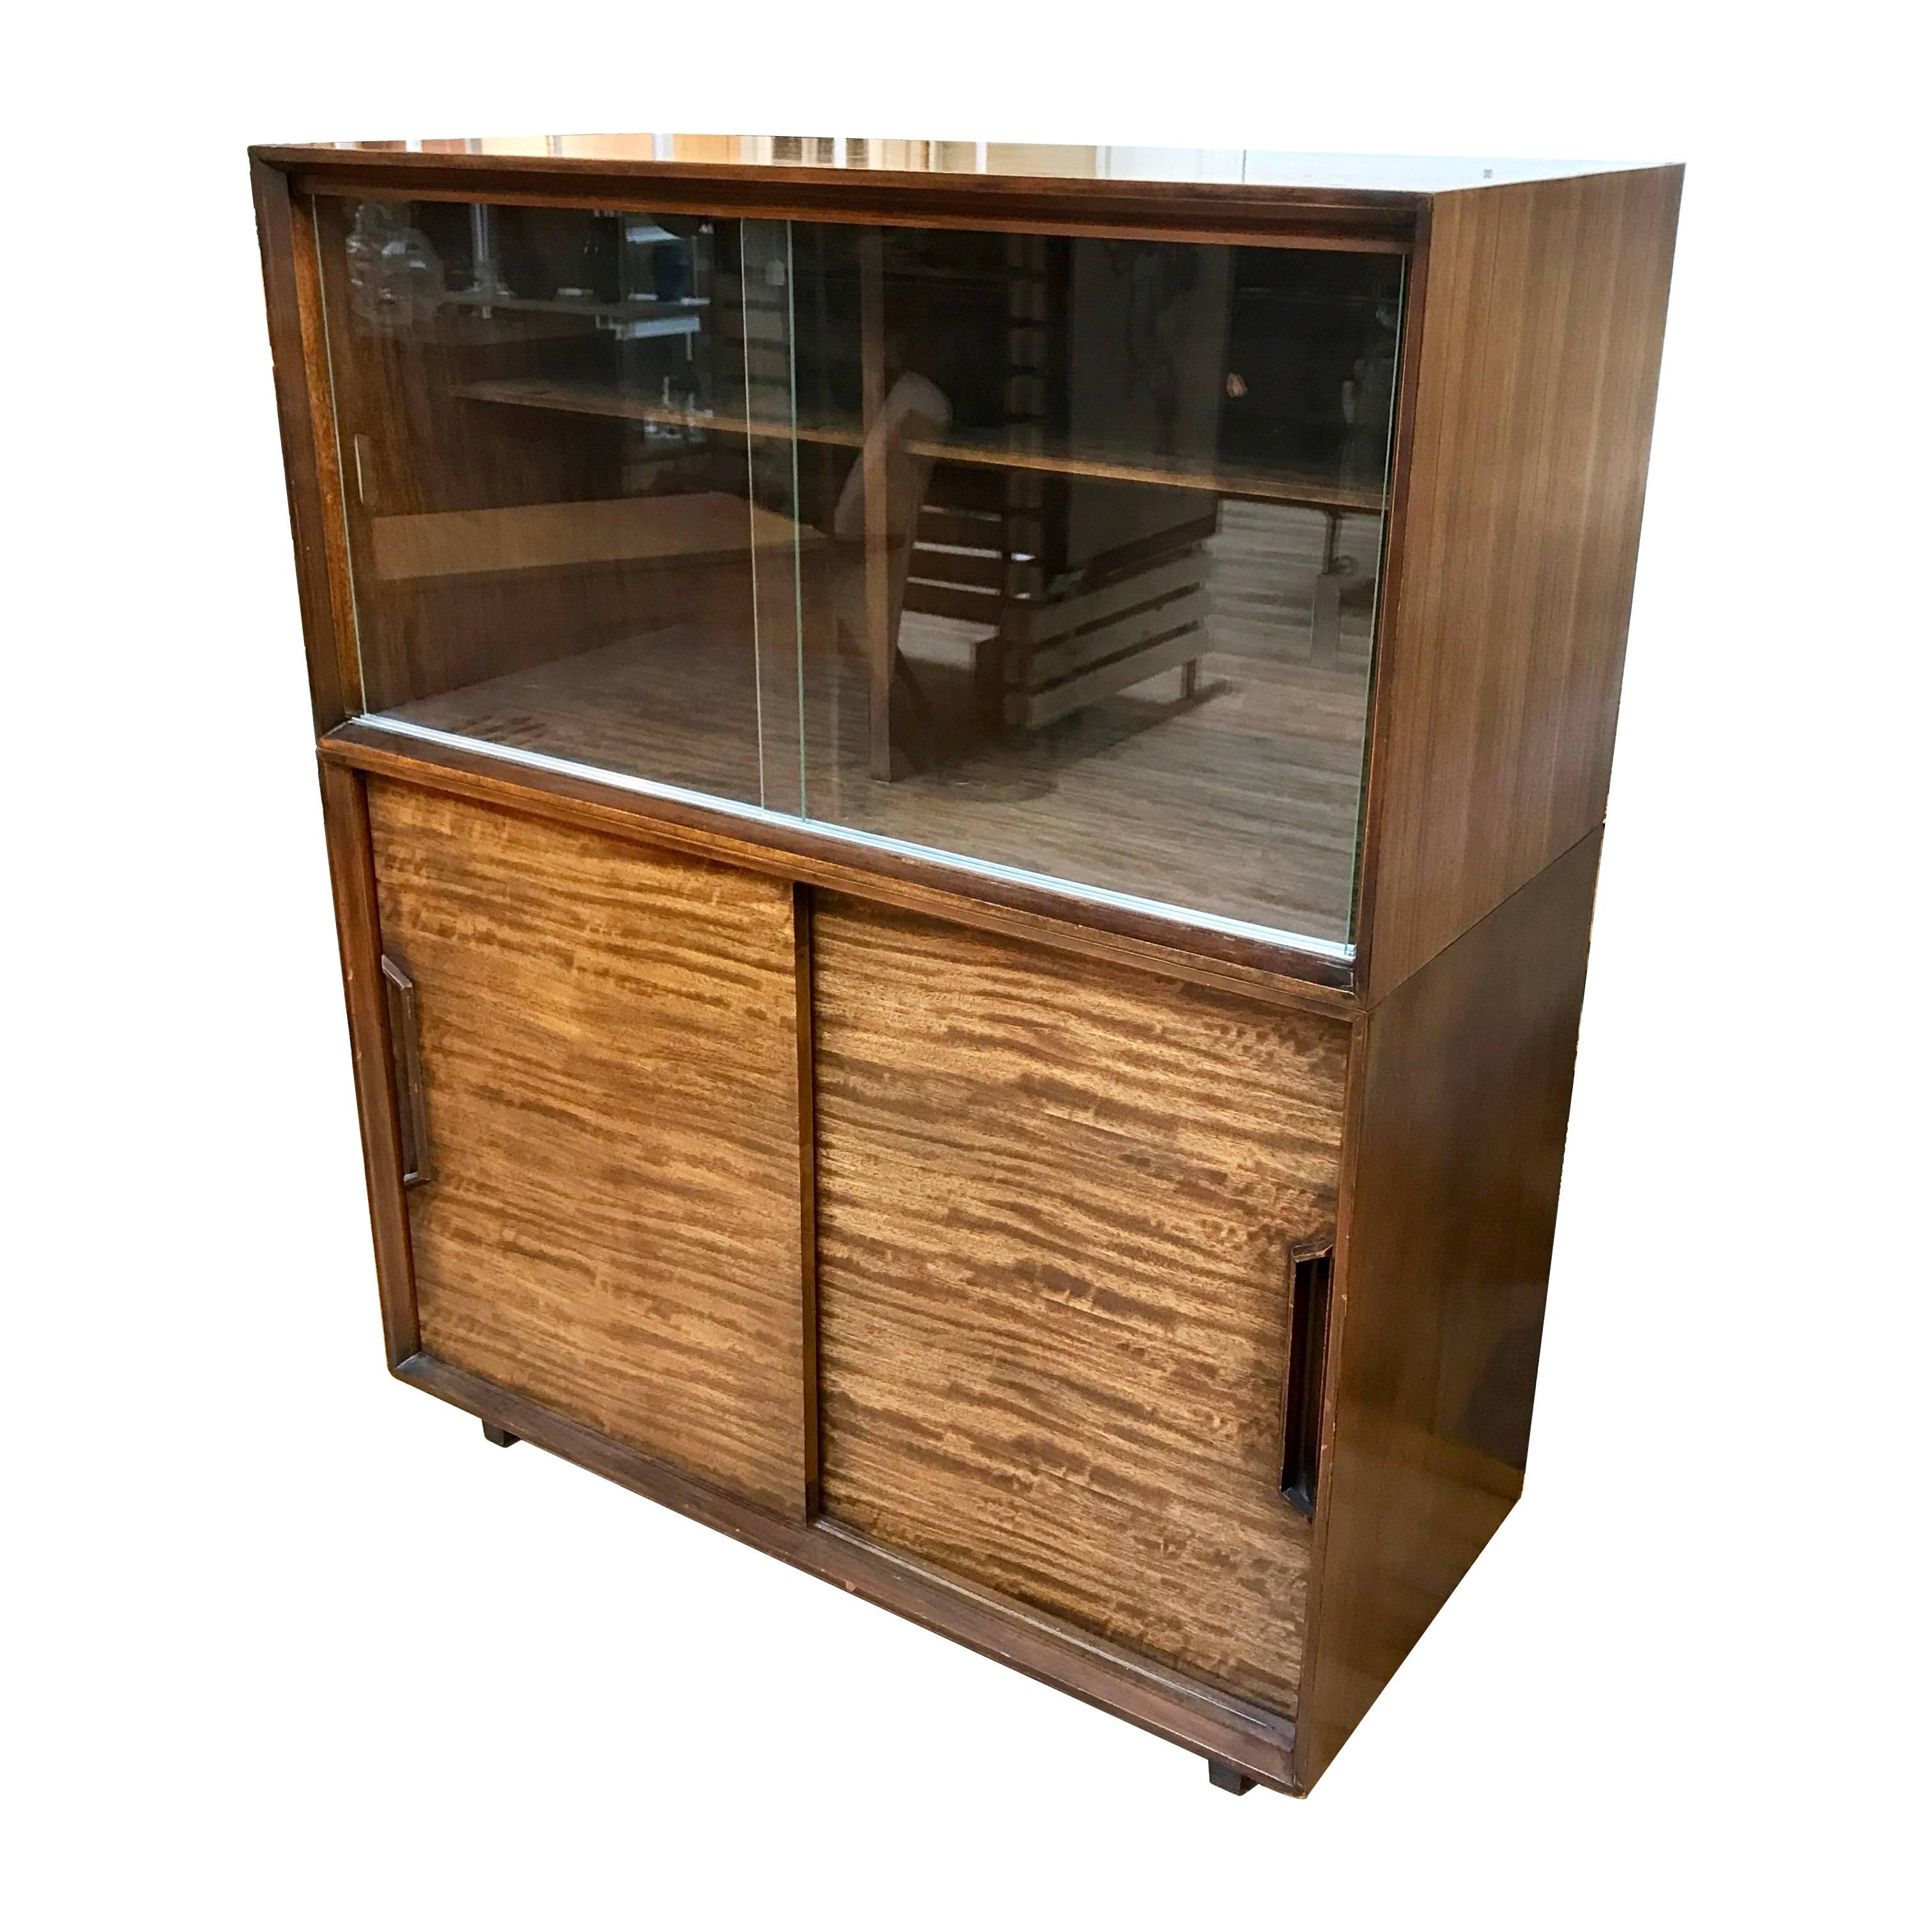 1950s China hutch designed by Milo Baughman for Drexel Perspective. Made of Mindoro wood, the hutch has two sliding glass doors and adjustable shelves in the upper section, and two sliding wood doors with drawers and adjustable shelving in the lower